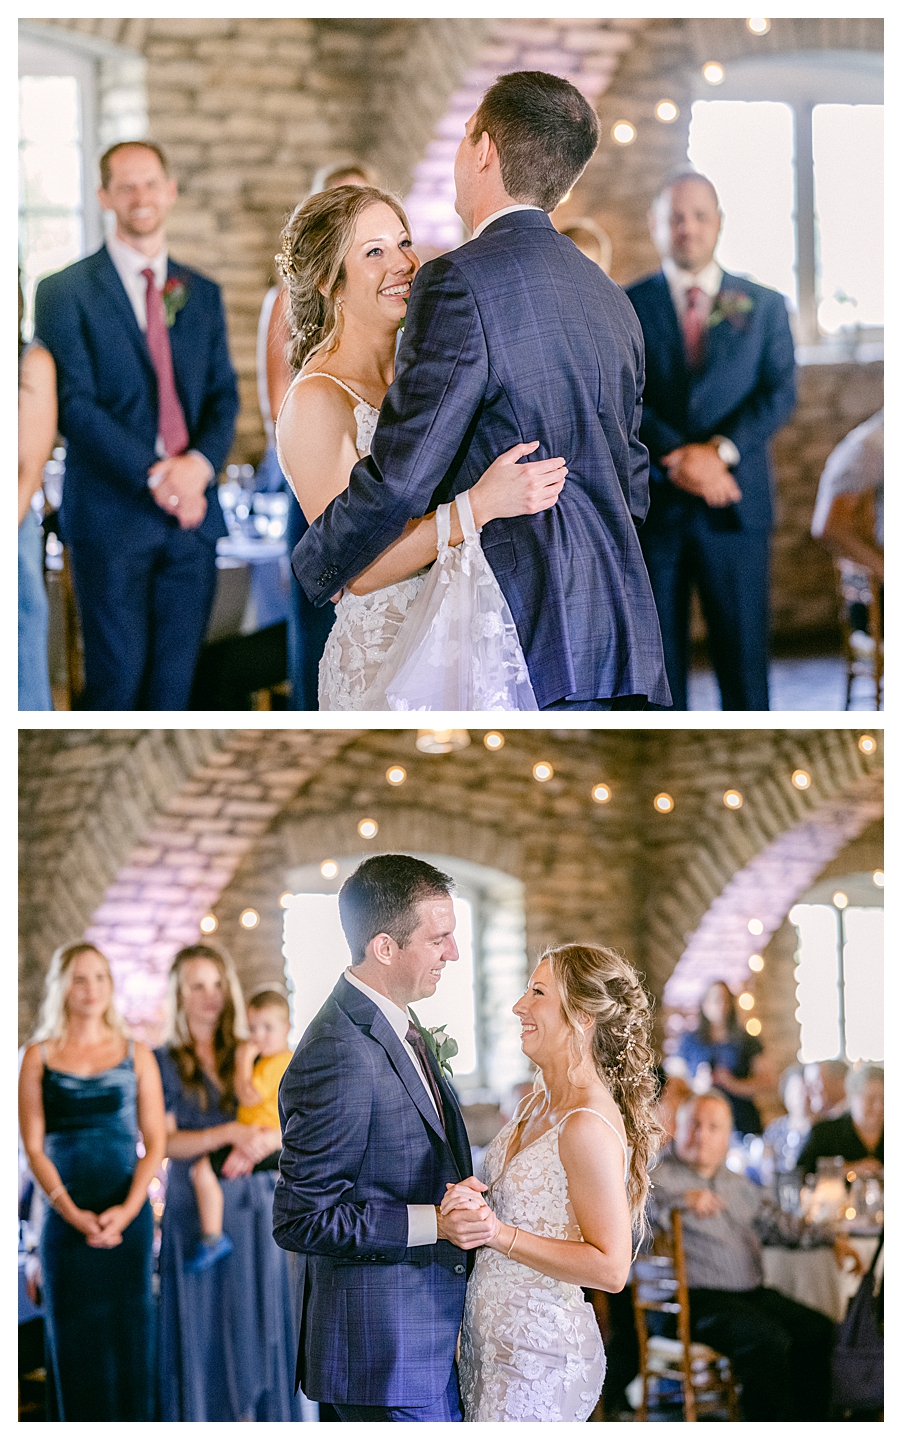 The couples' first dance at a Mayowood Stone Barn Wedding. Photo by Kayla Lee.